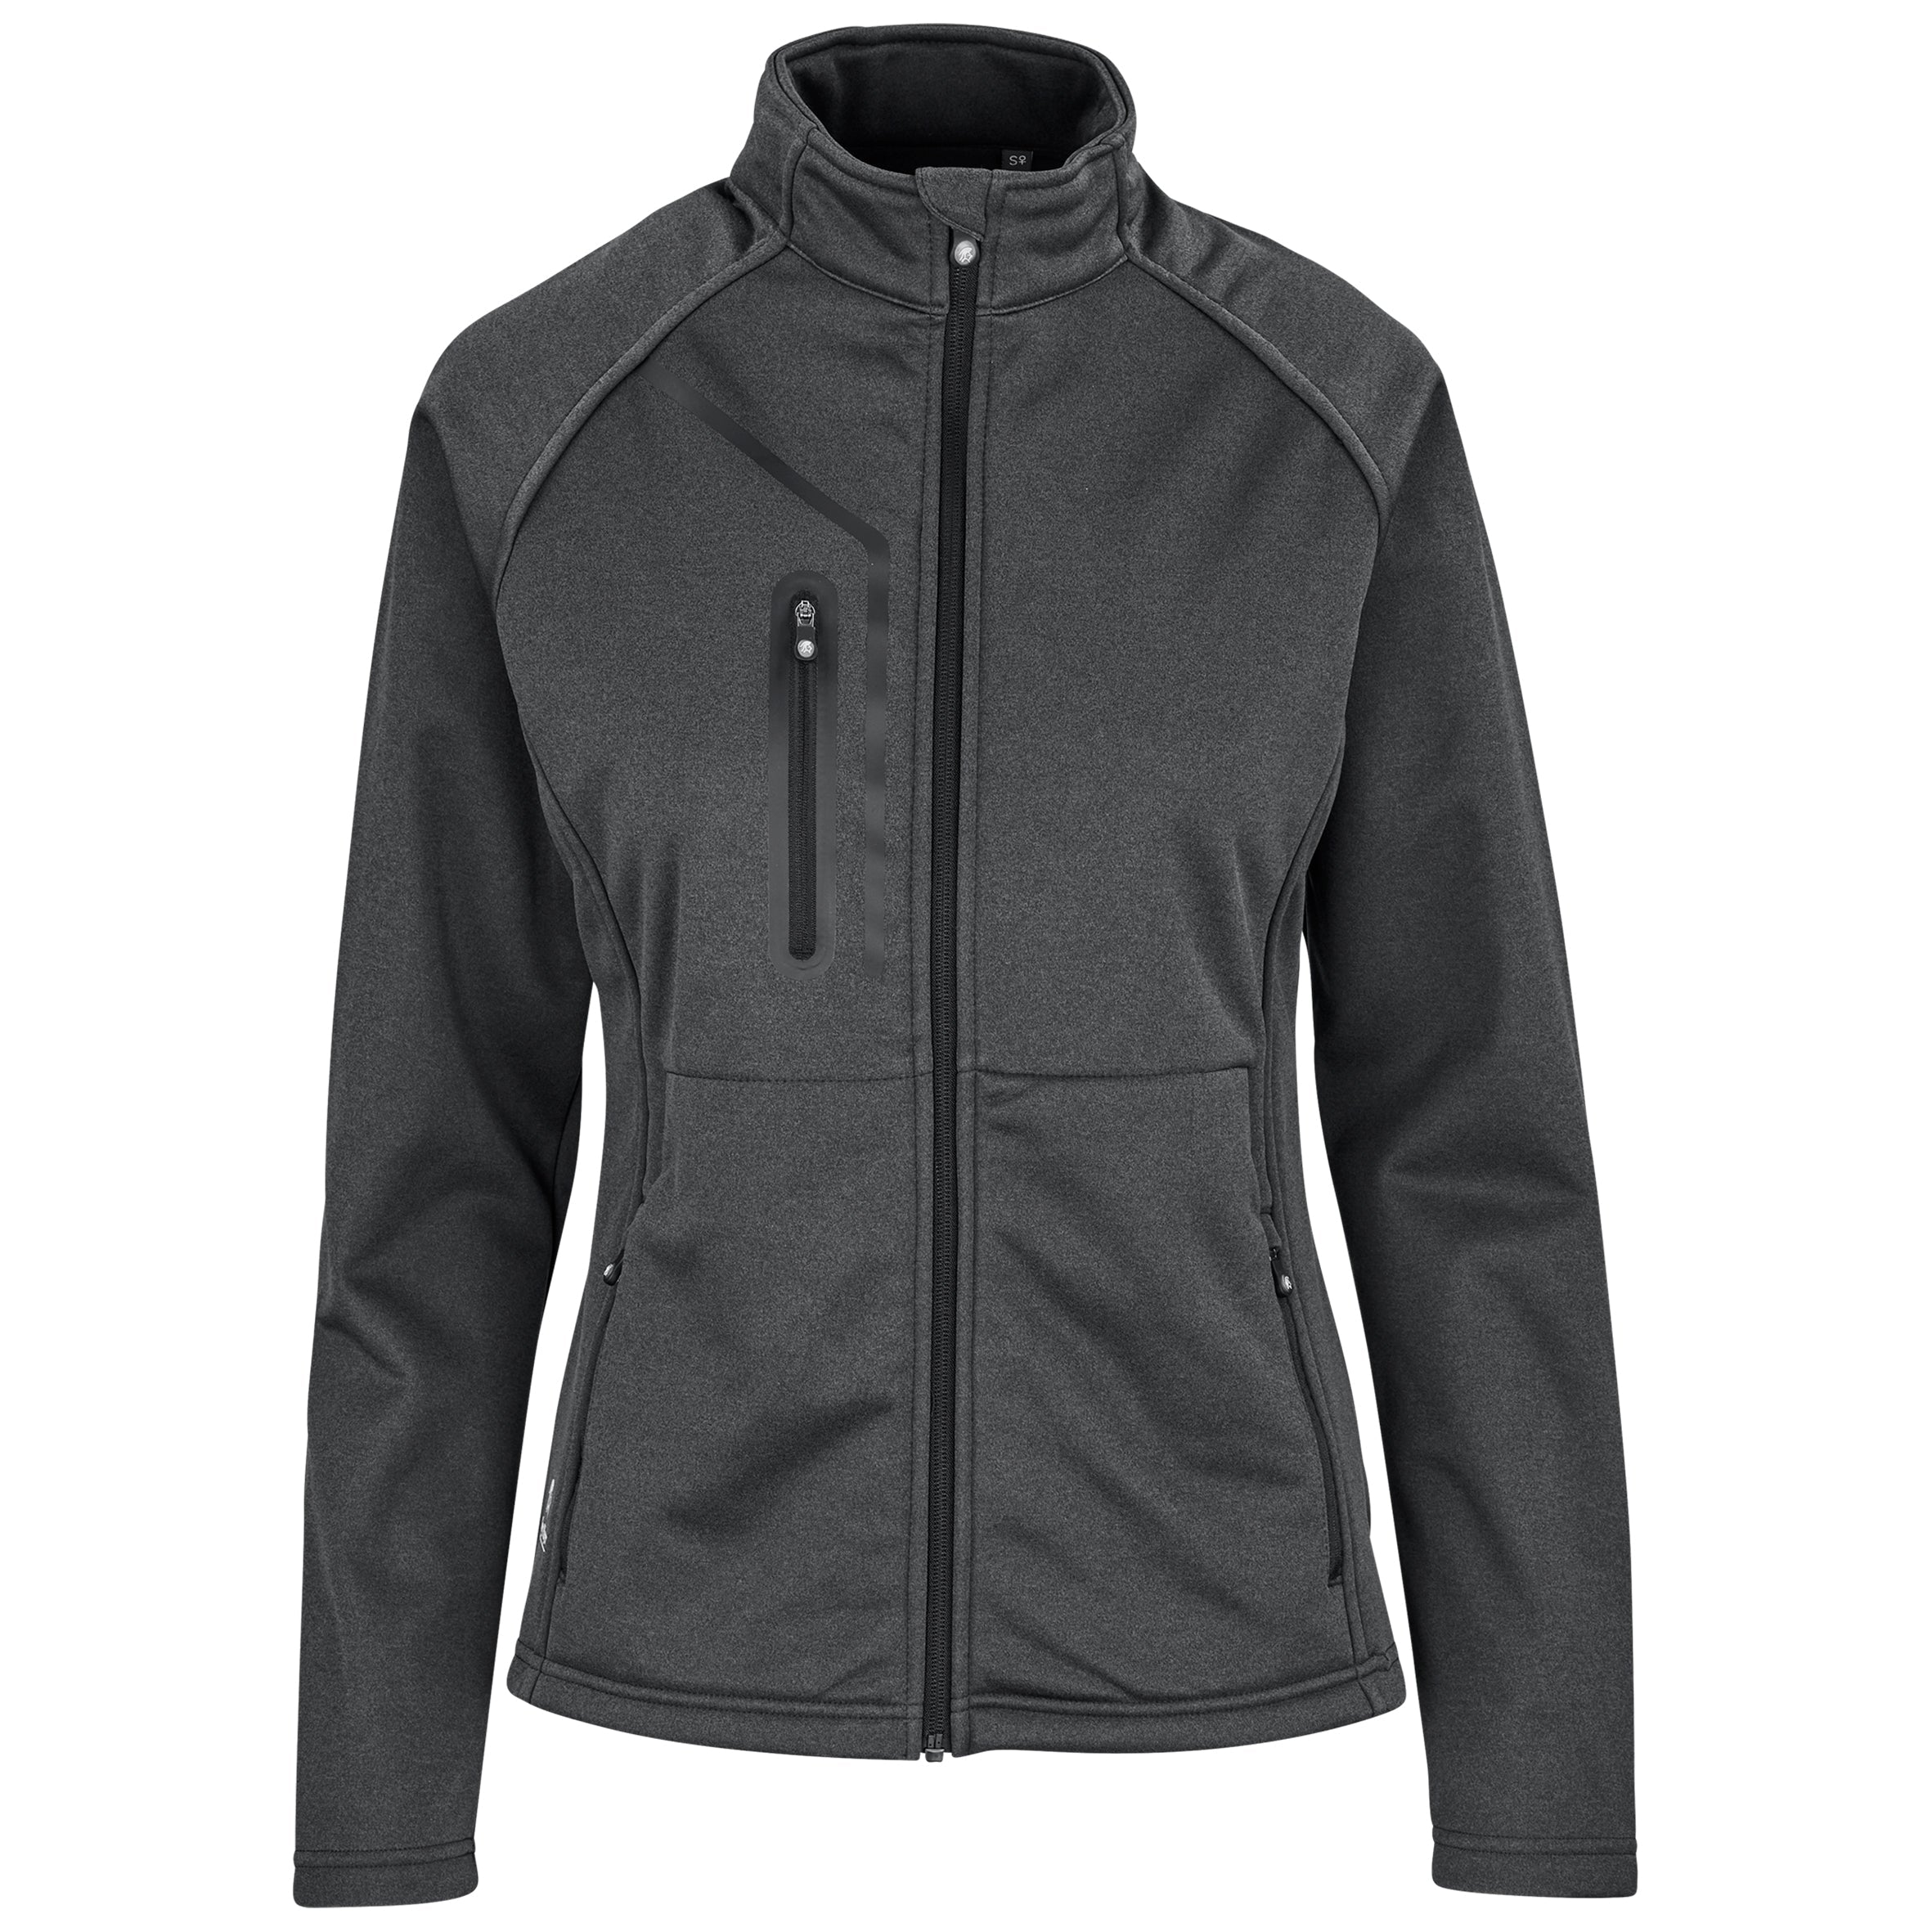 A dark grey ladies jacket with a full length zip, right chest zip in softshell fabric